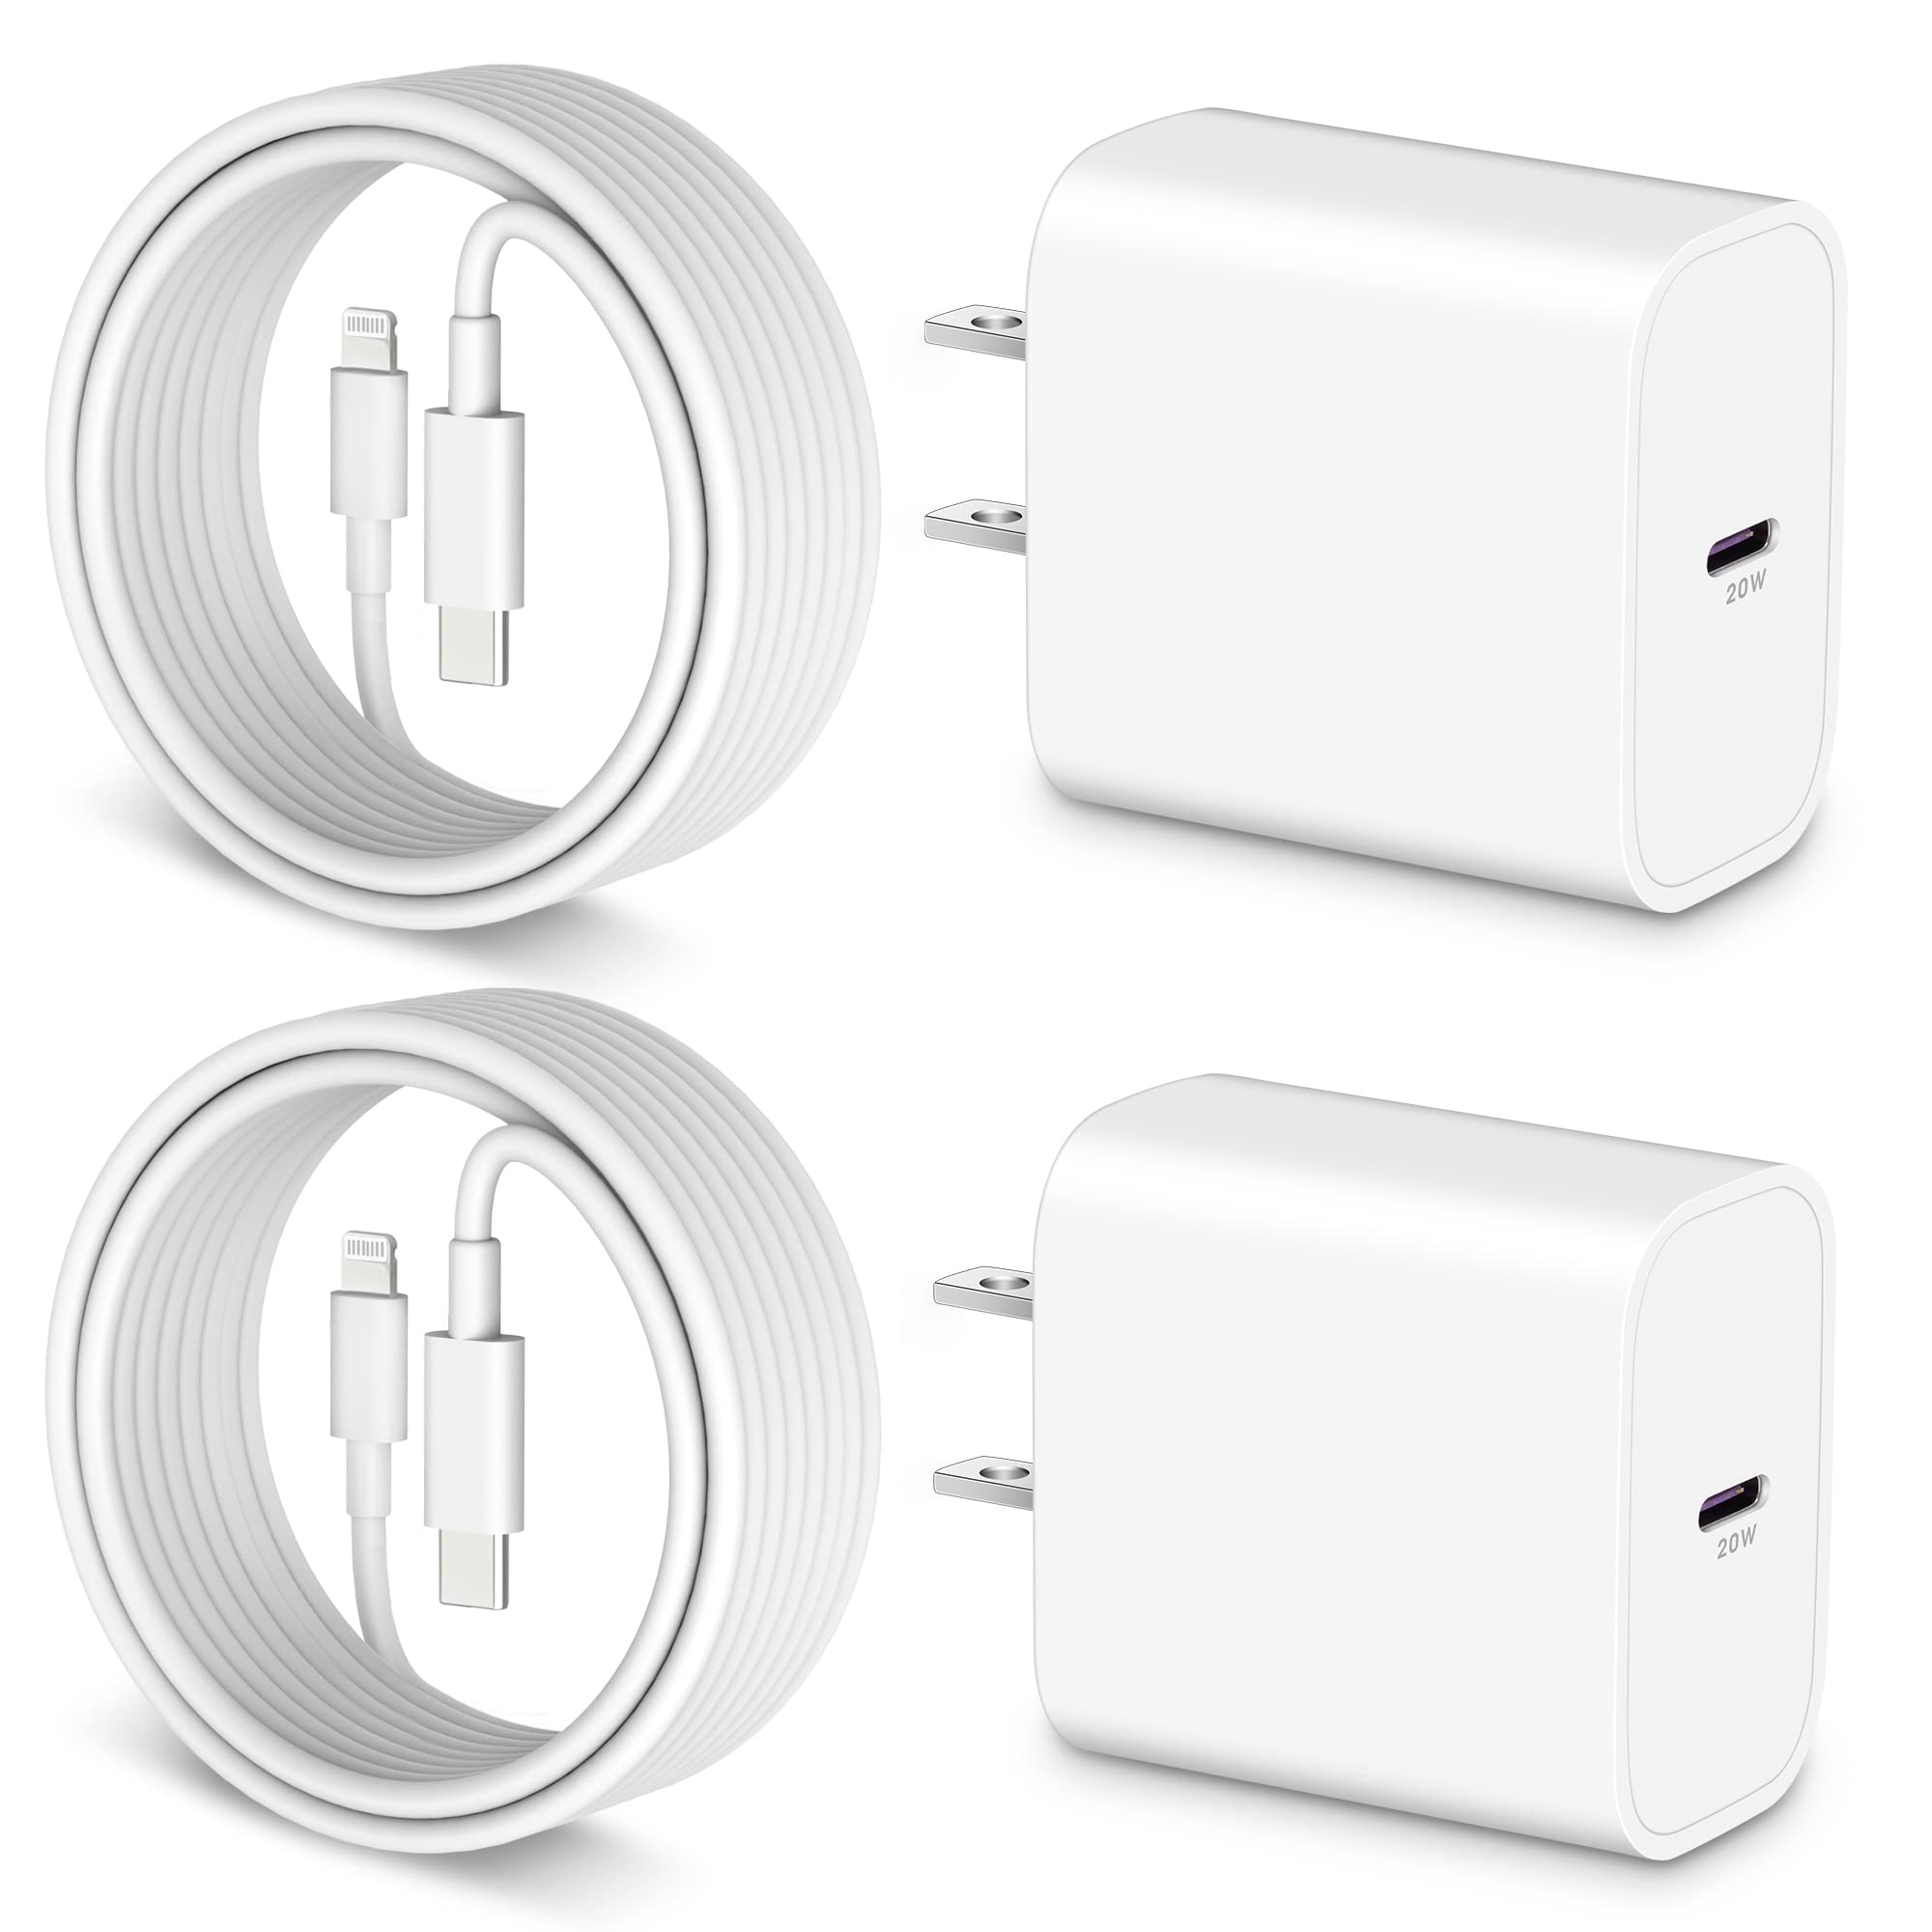 iPhone 14 13 12 Fast Charger [Apple MFi Certified], 2-Pack 20W PD USB C Wall Charger Type C Fast Charging Block Cube with 10FT Long Lightning Cable for iPhone 14 Pro Max/14/13 Pro Max/13/12/12 Pro/11